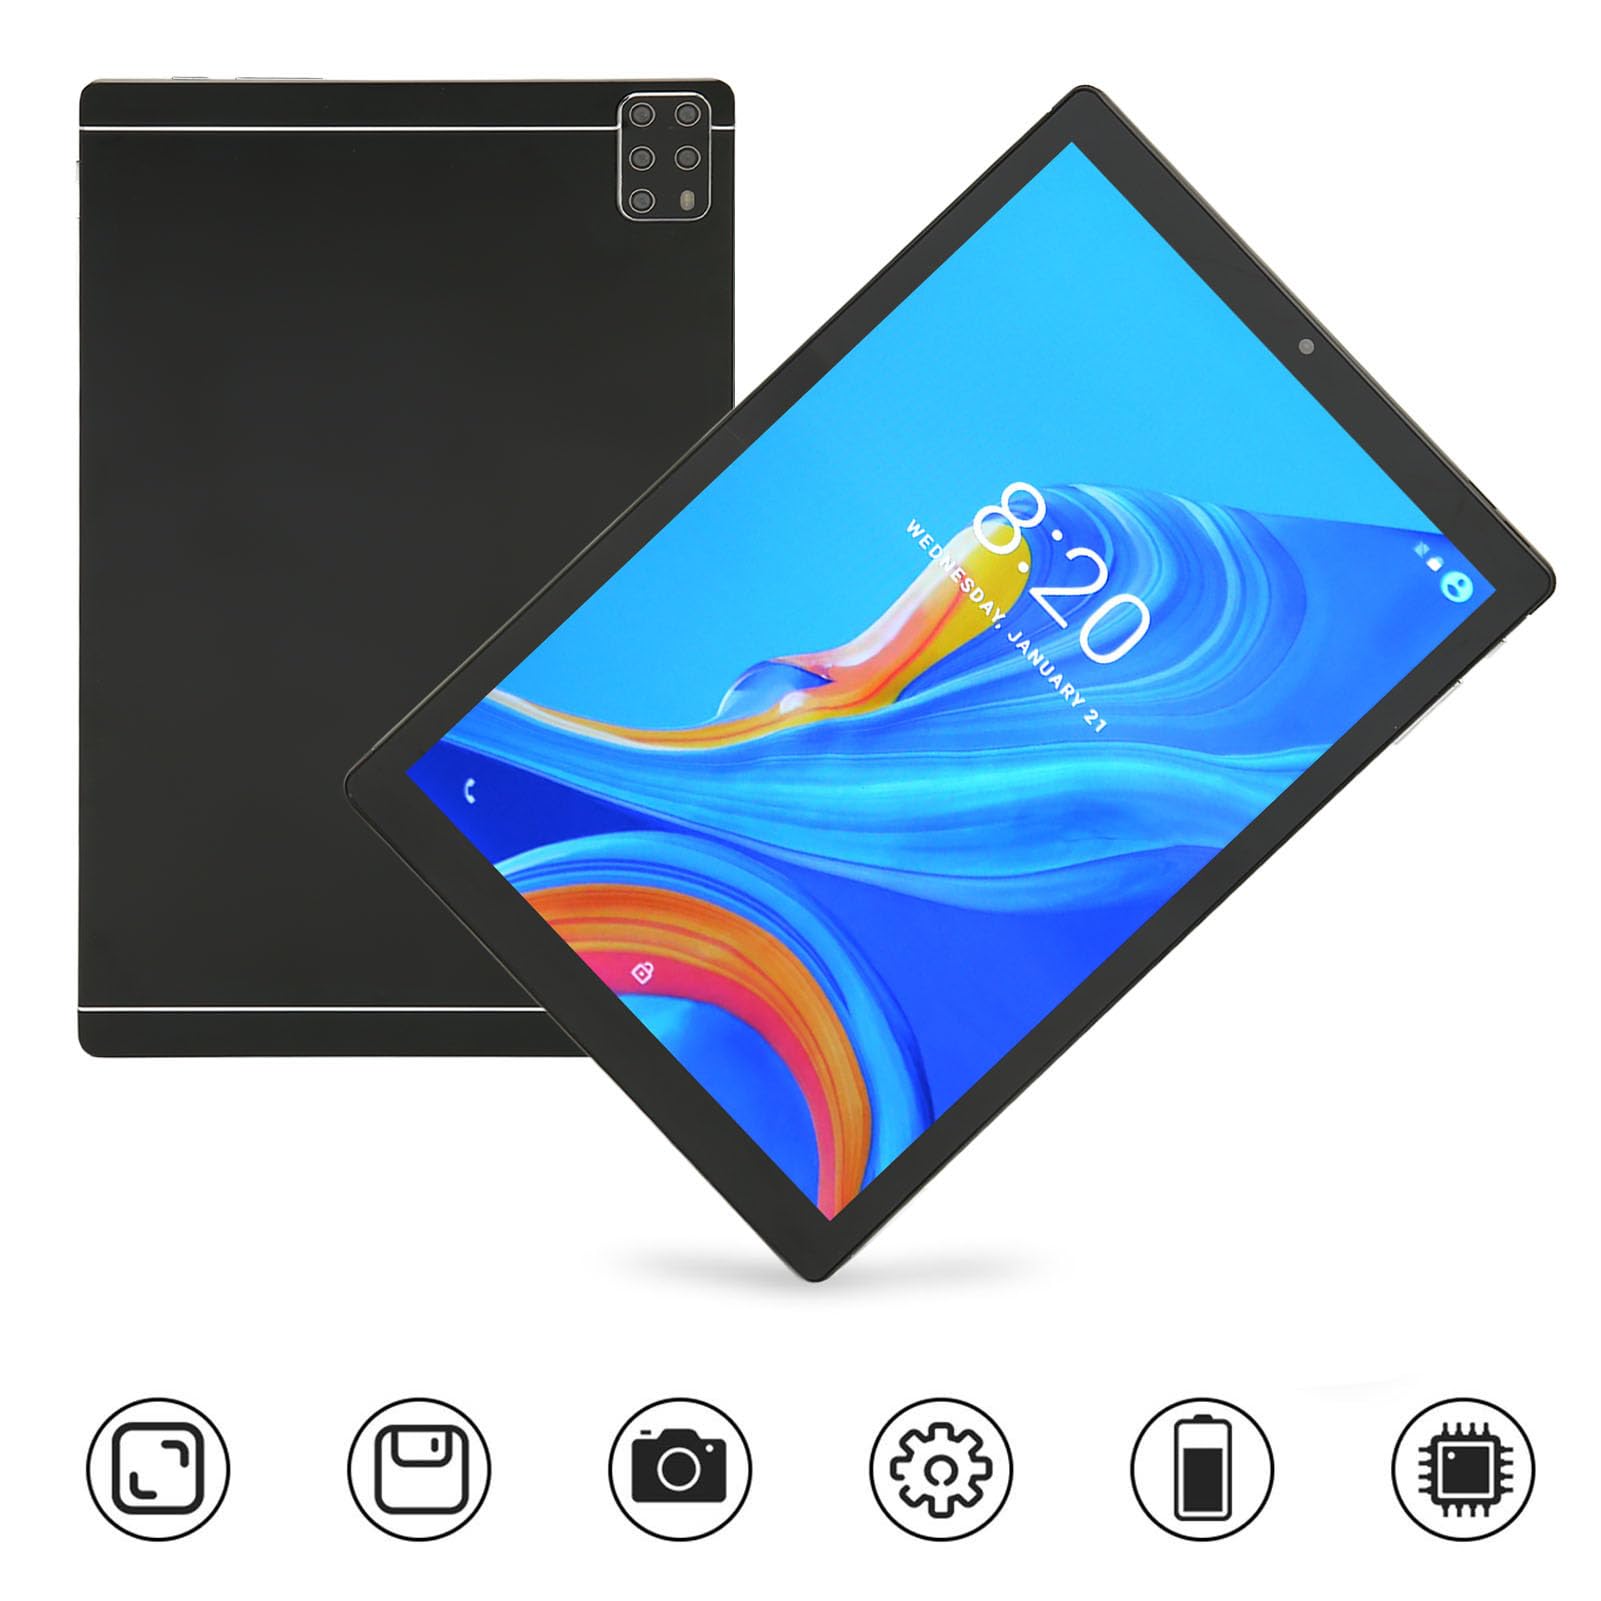 Luqeeg 10.1 Inch FHD Tablet, 100‑240V 6GB RAM 128GB ROM MT6735 Deca Core 5G WiFi 8800mAh 2 in 1 Tablet PC Dual Camera for Android 12 for Gaming (US Plug)